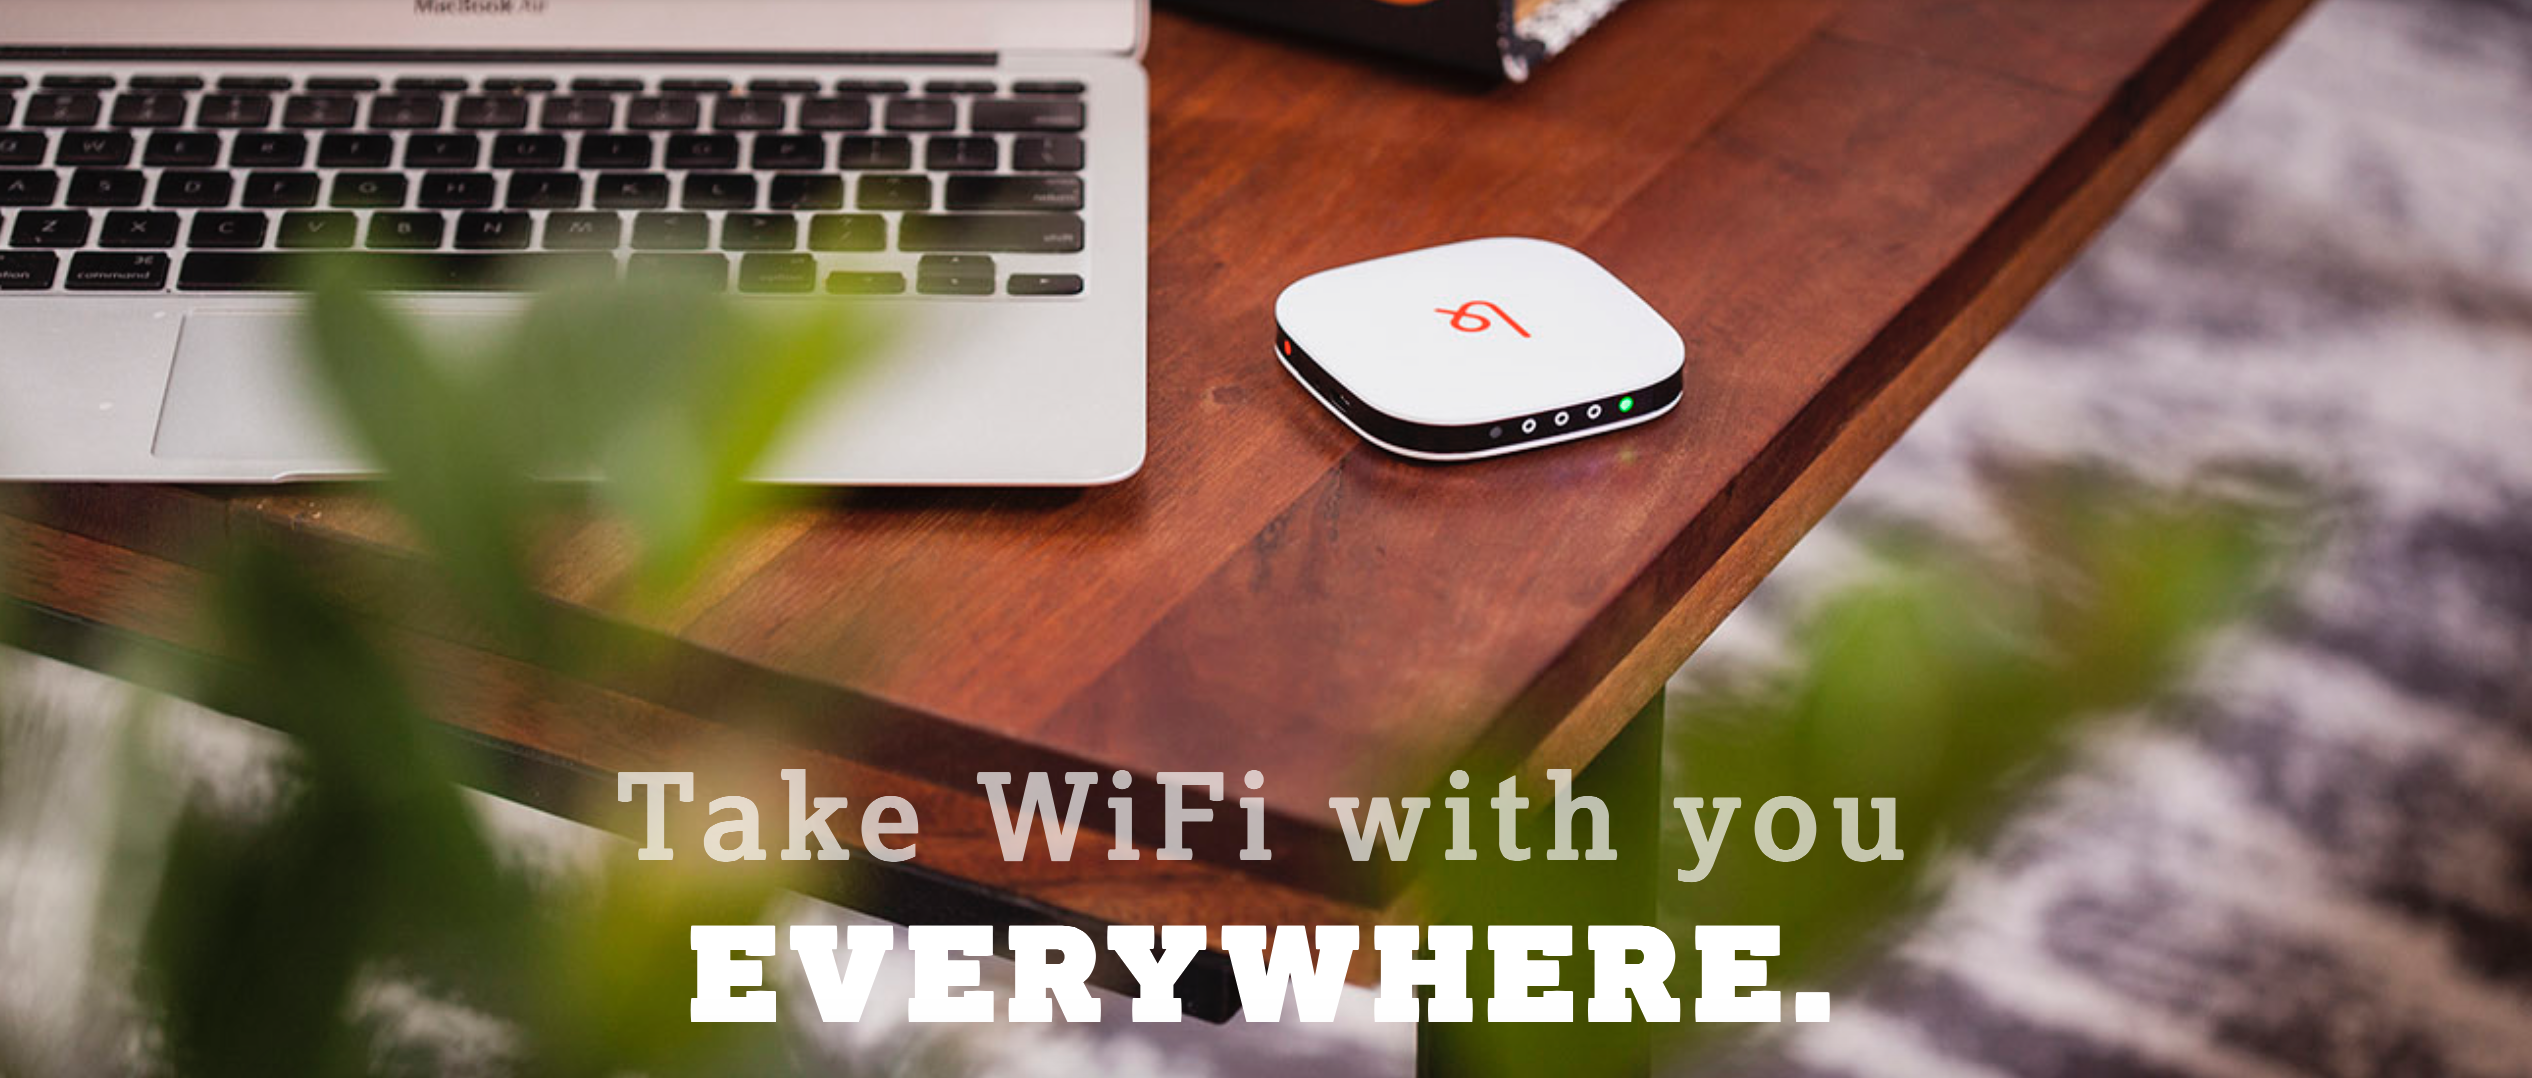 Featured image for “WIFI Everywhere with Karma”